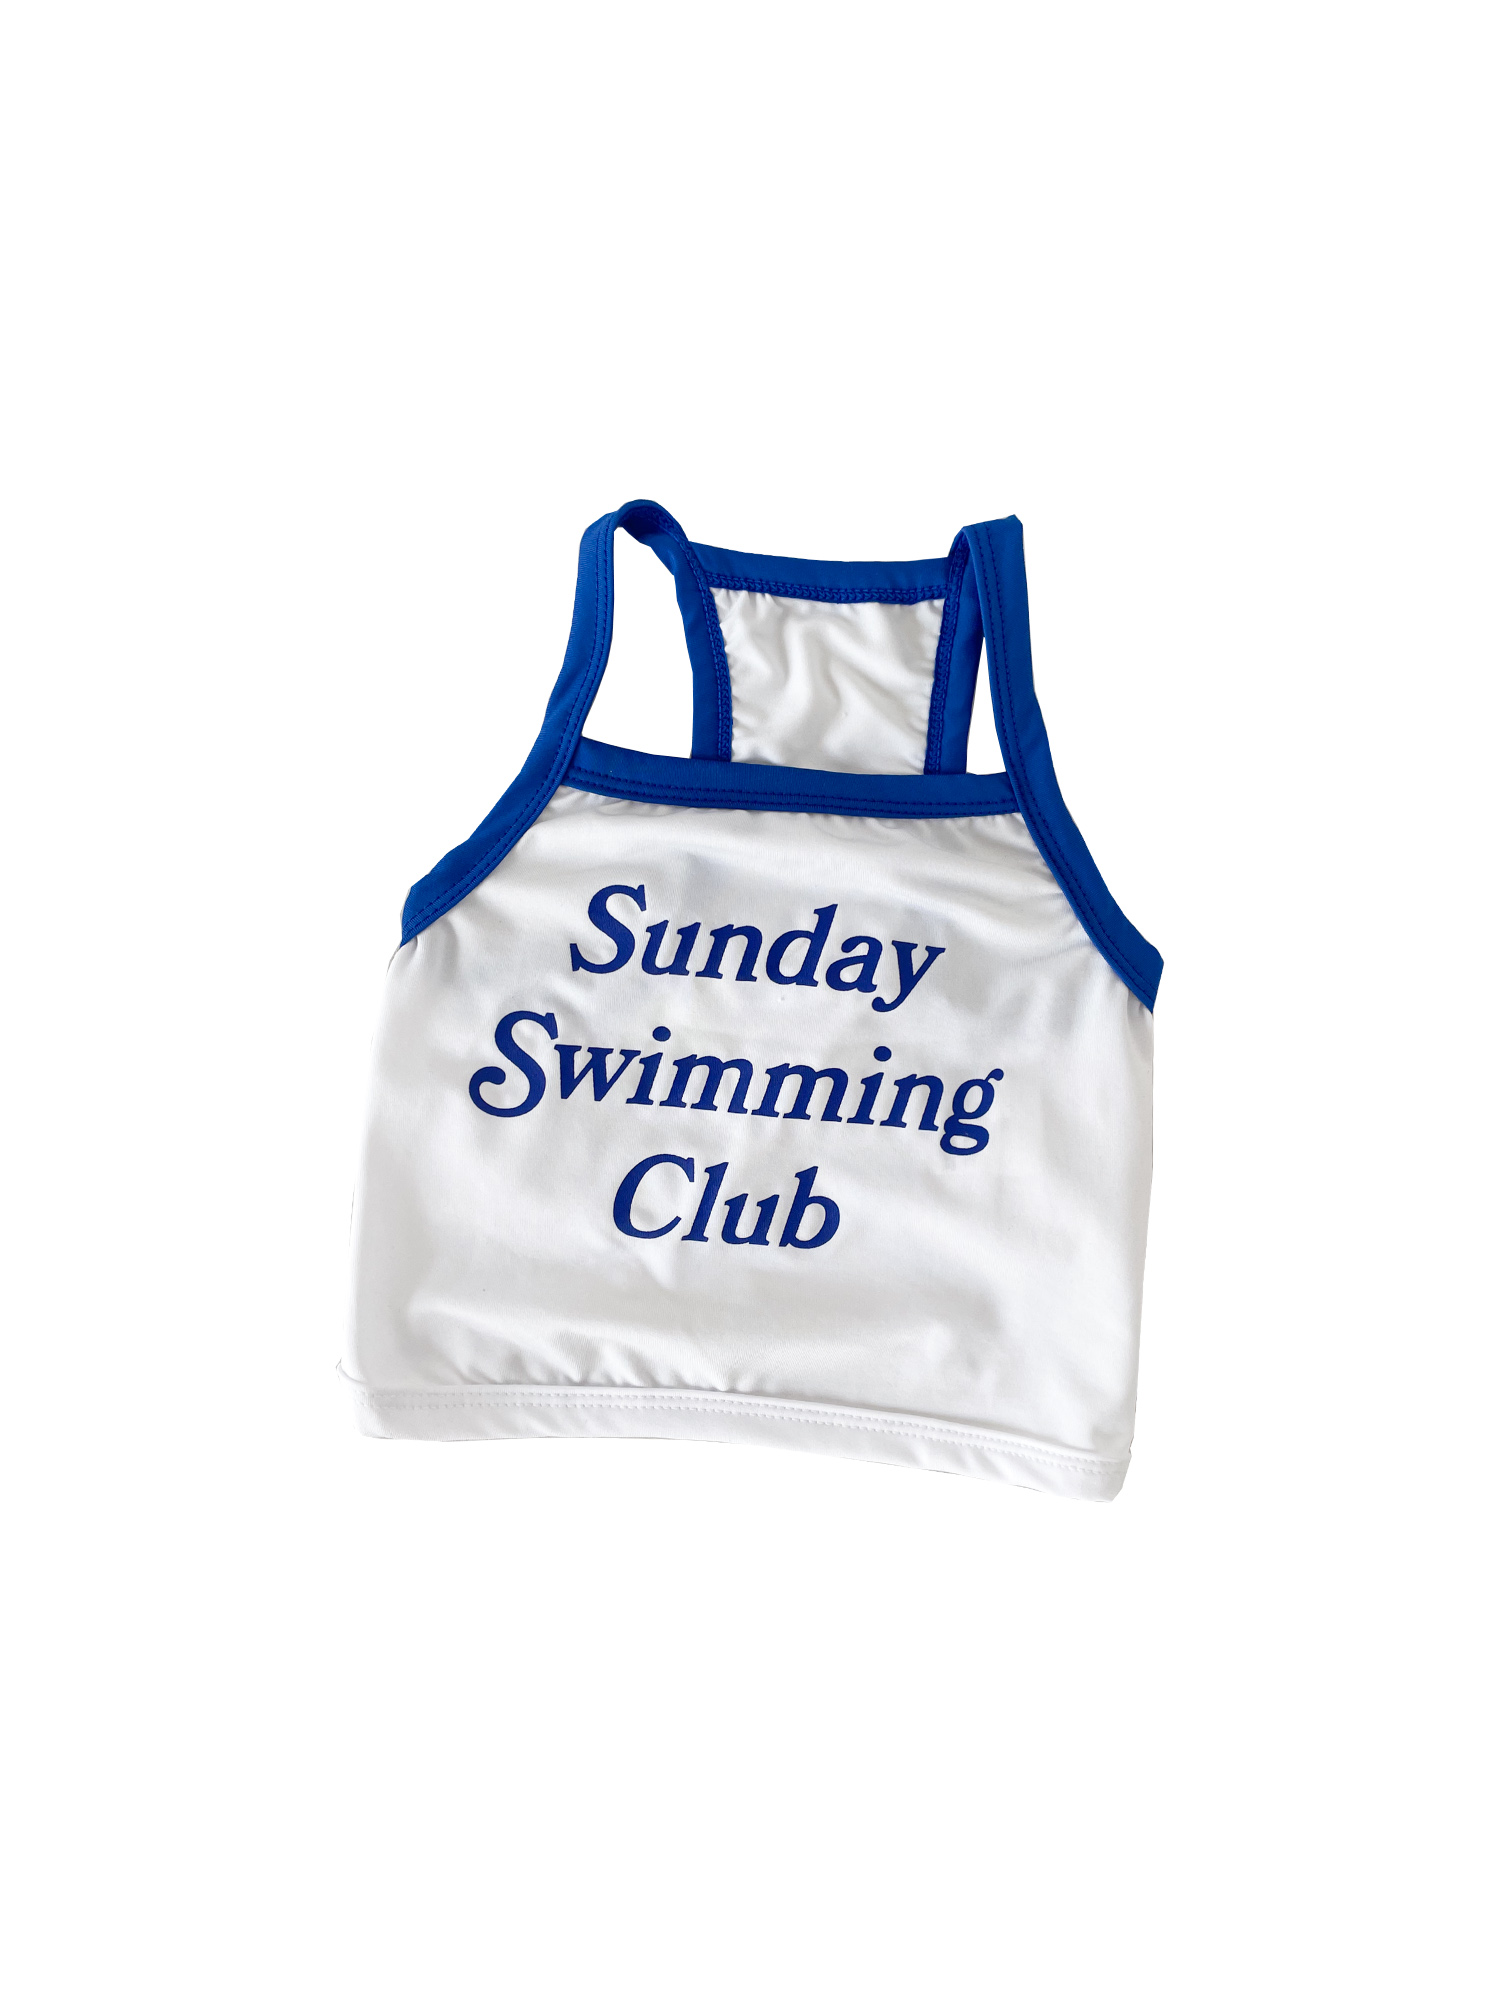 Sunday Swimming Club Cooling Top